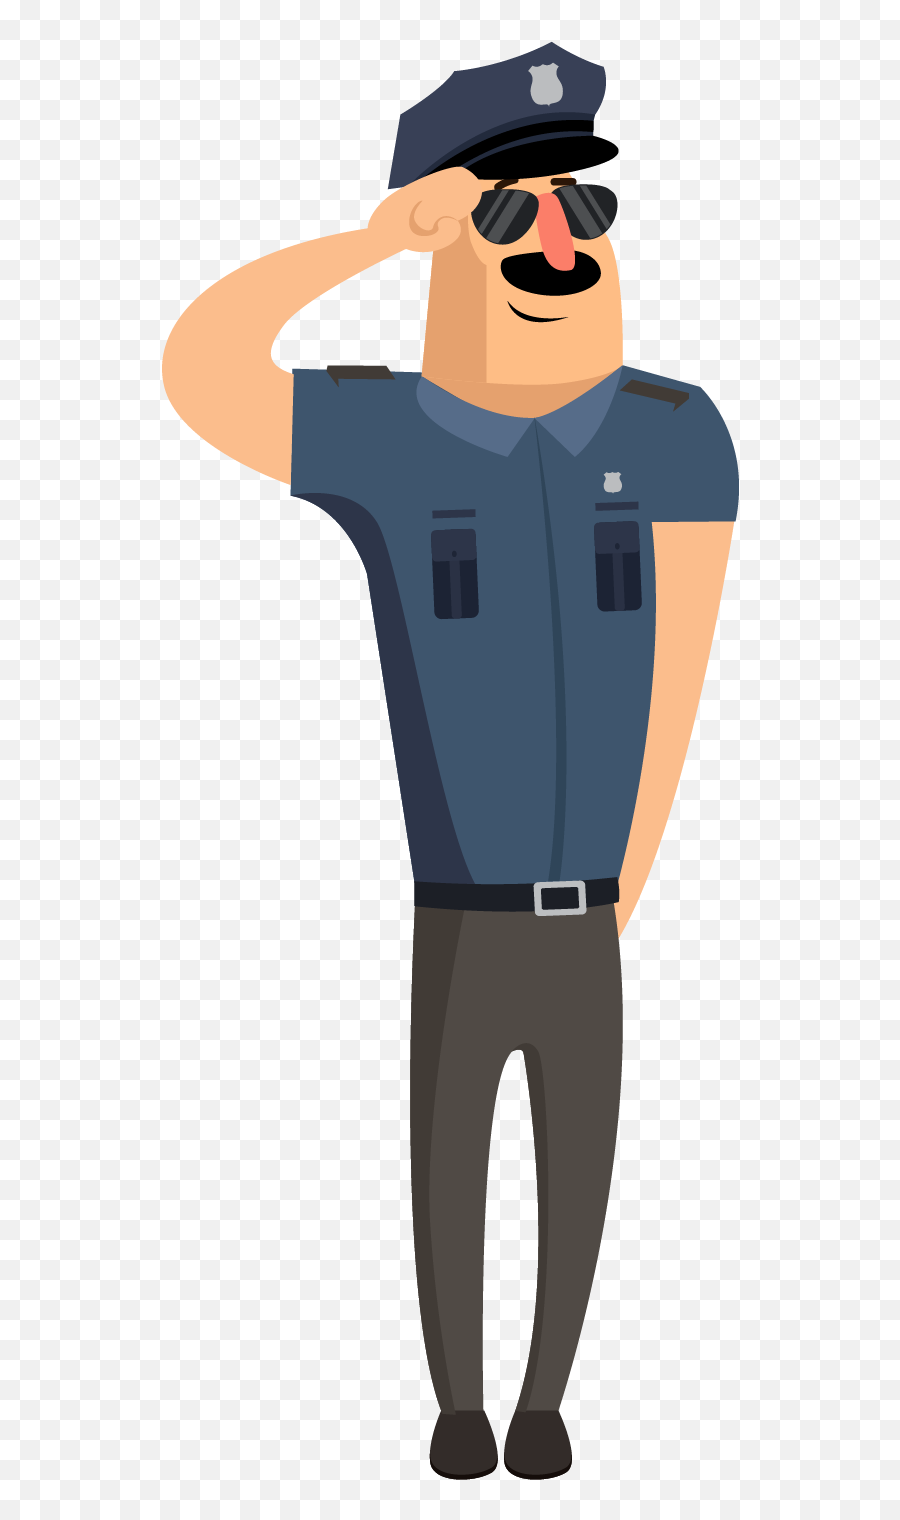 Police Officer Security Guard - Police Guard Png Download Peaked Cap Emoji,Security Clipart